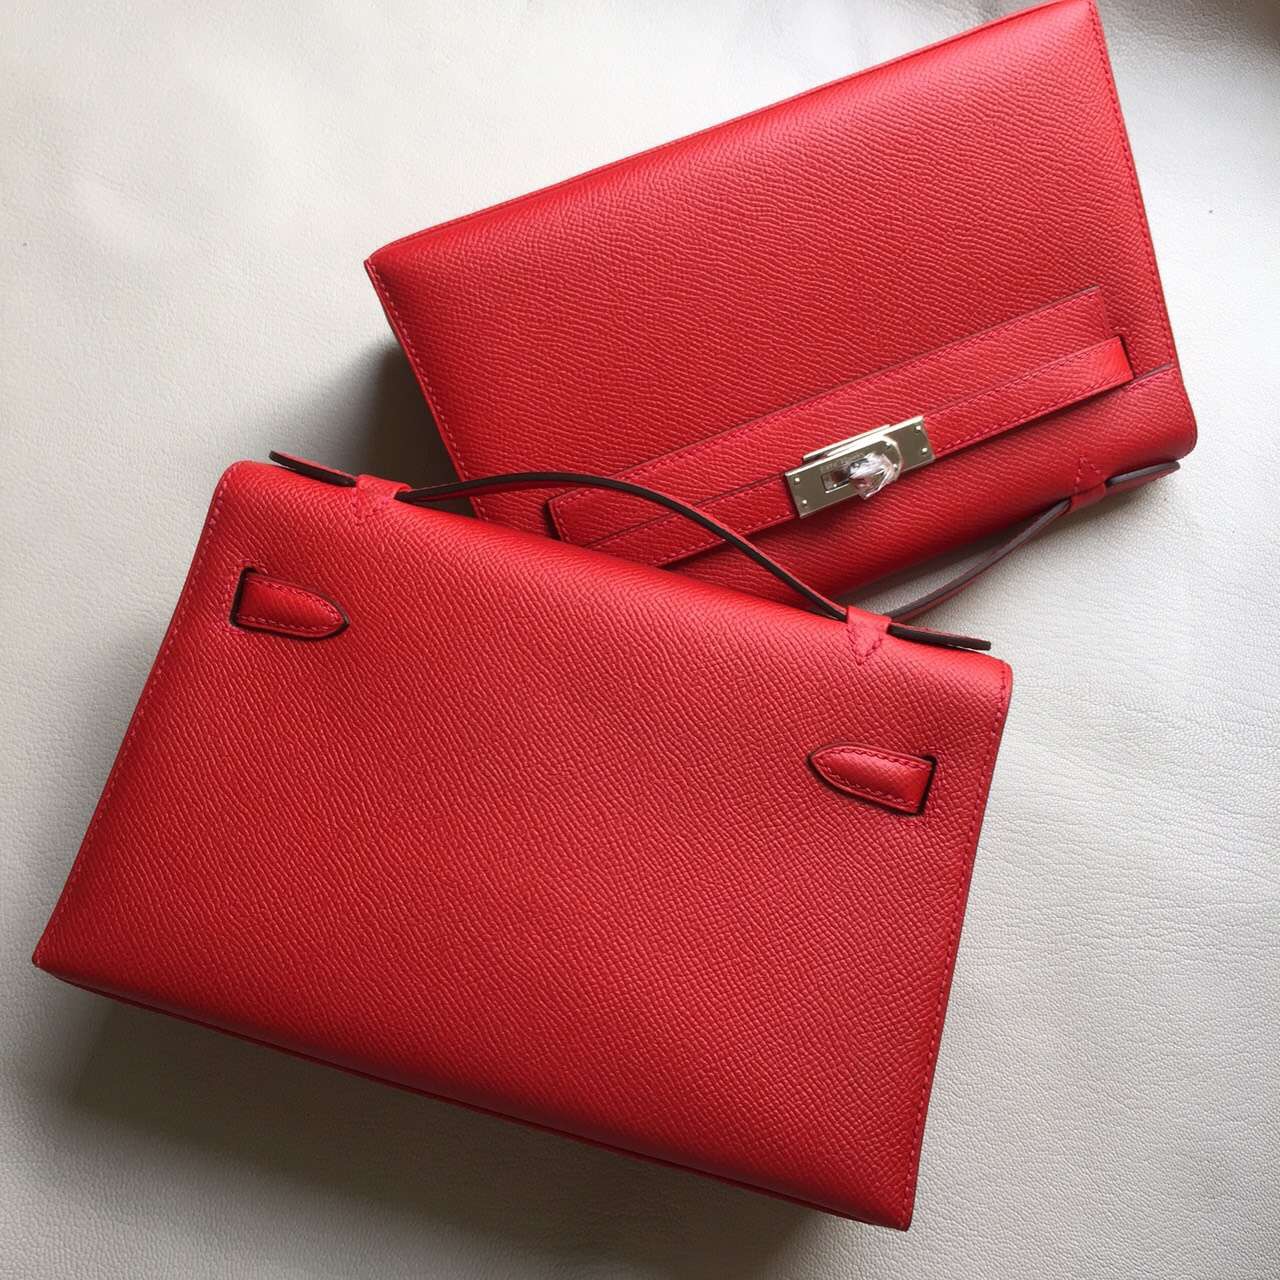 Discount Hermes Q5 Rouge Casaque Epsom Calf Leather Minikelly Clutch Bag 22CM